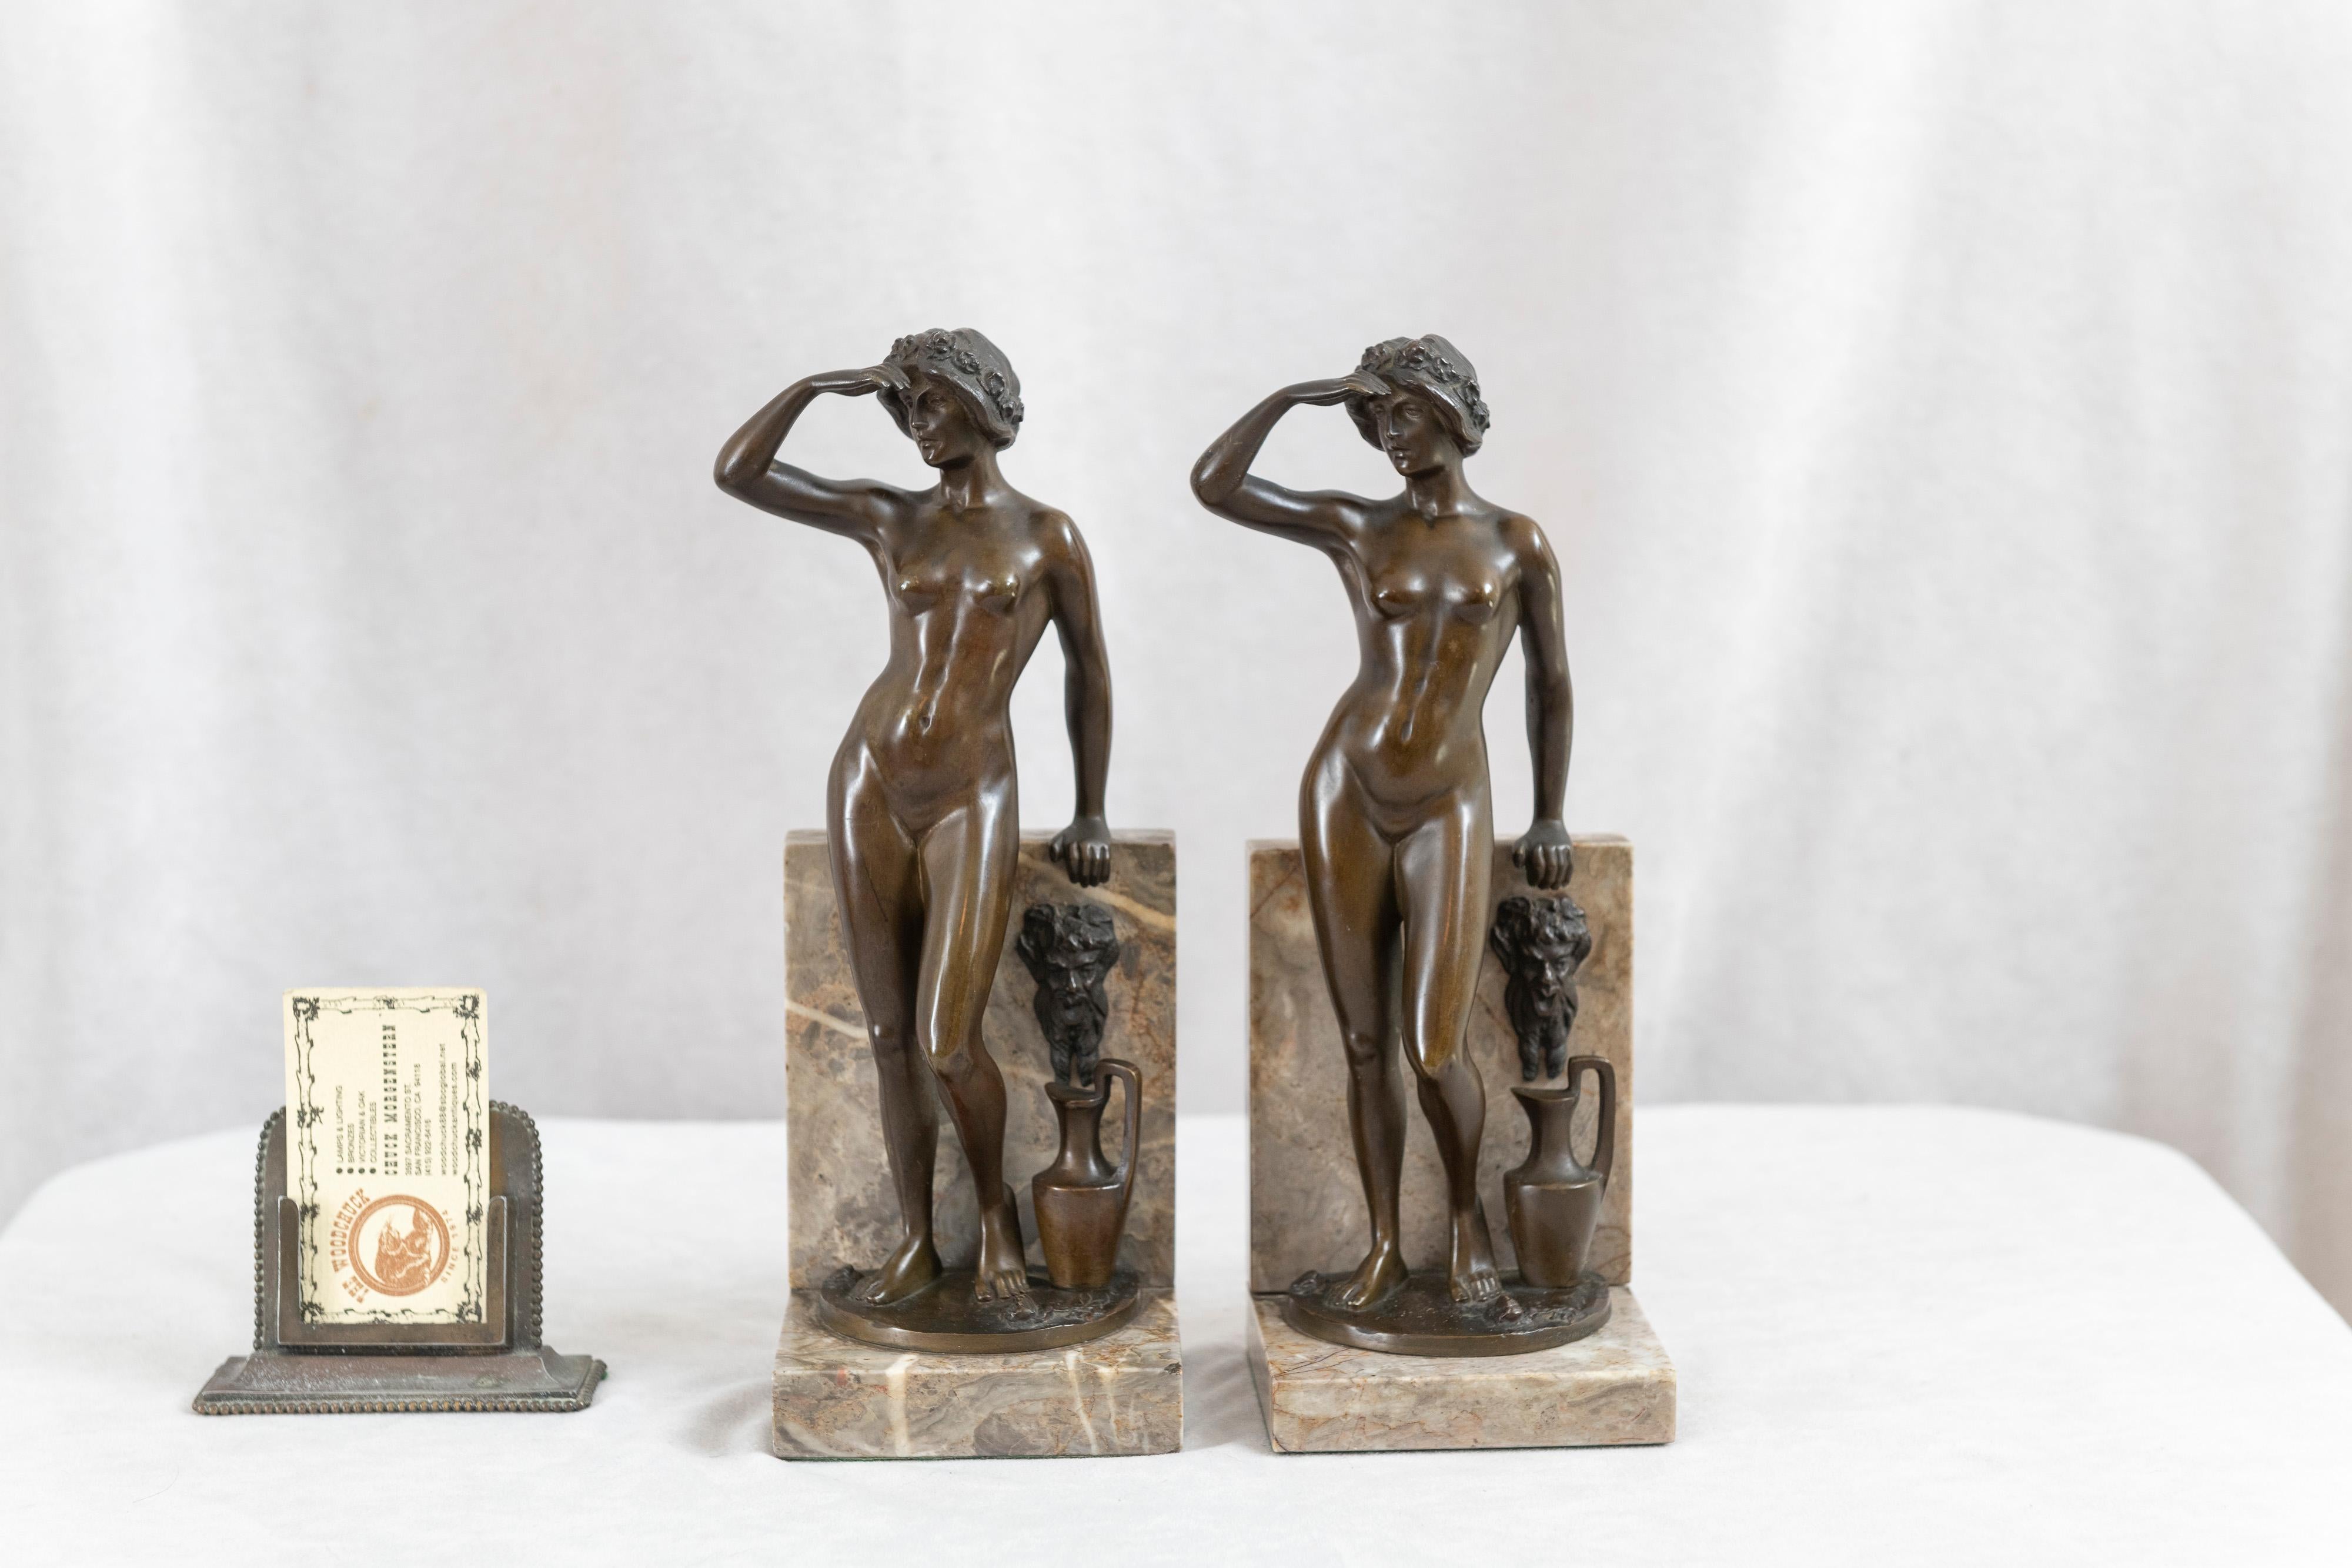 Bookends rarely come this beautiful. The nude ladies are richly factory patinated and in excellent condition. They are artist signed 